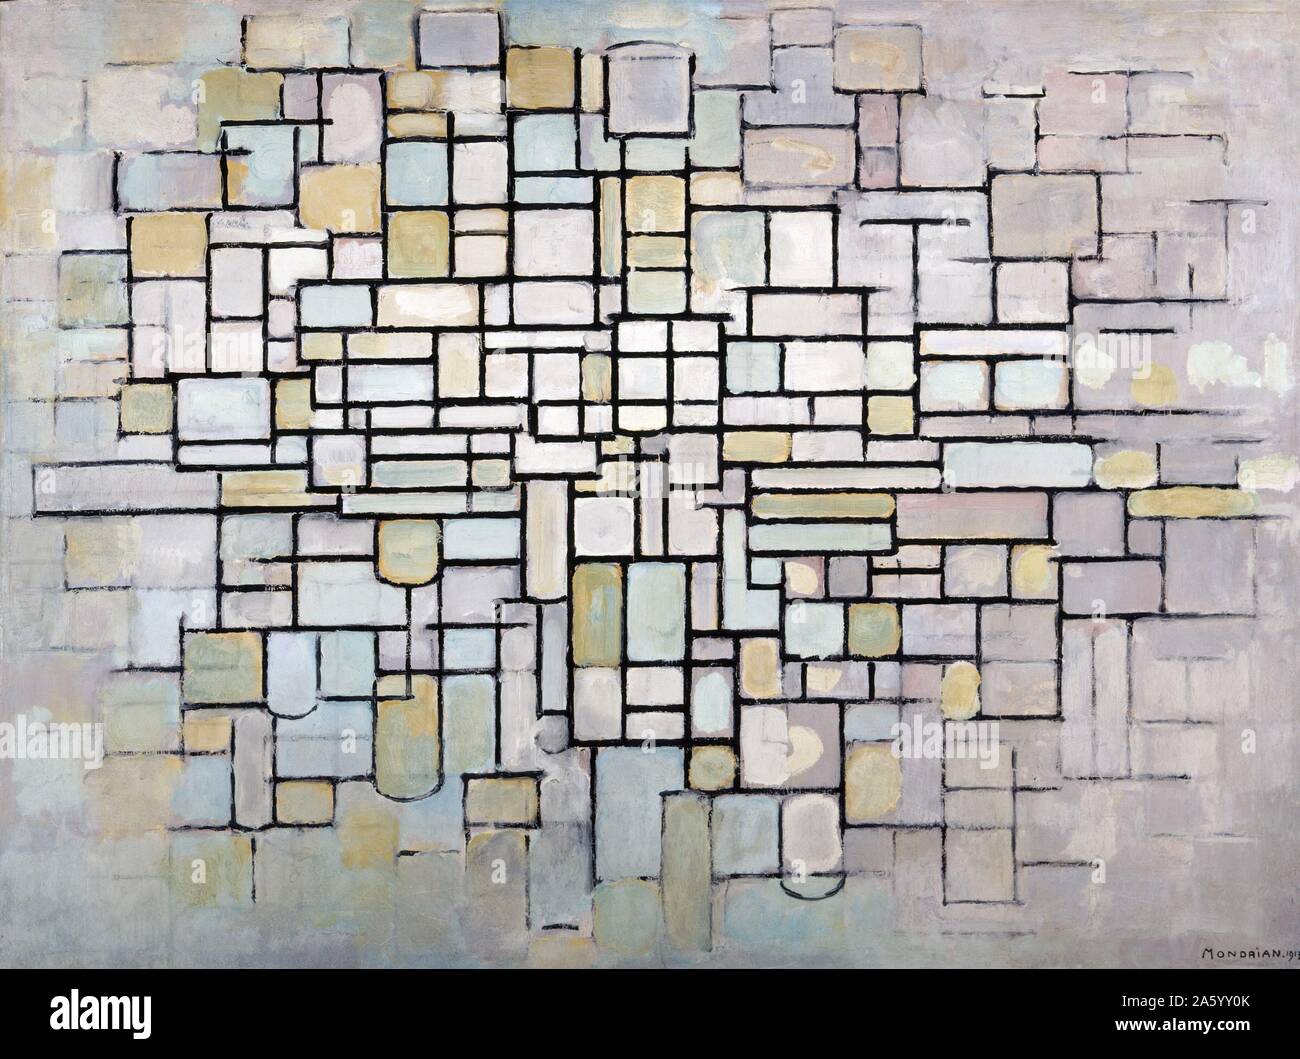 Painting titled 'Composition no. 11' by Piet Mondrian (1872-1944) Dutch painter. He was a contributor to the De Stijl art movement and group, which was founded by Theo van Doesburg. He evolved a non-representational form which he termed neoplasticism. Dated 1942 Stock Photo